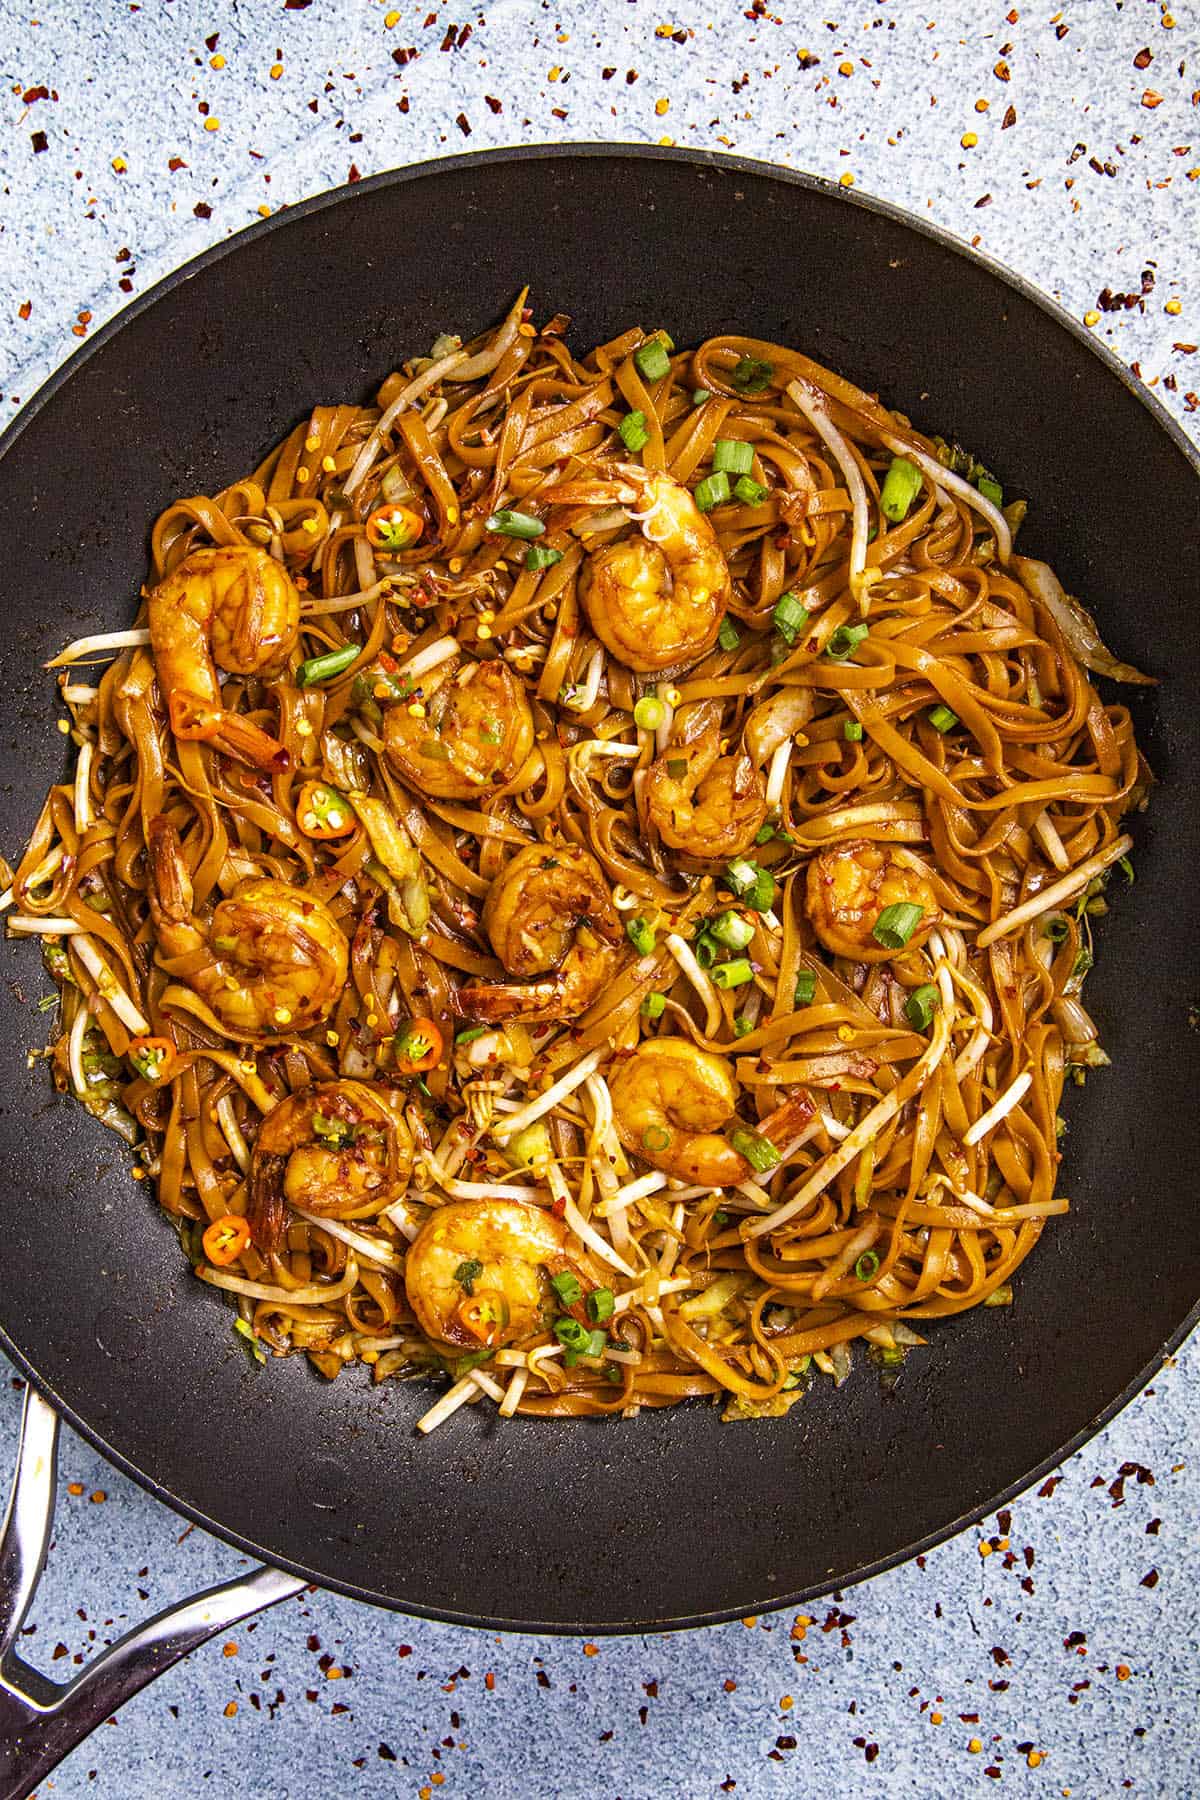 Mie Goreng, Indonesian stir fry noodles, in a pan with lots of shrimp